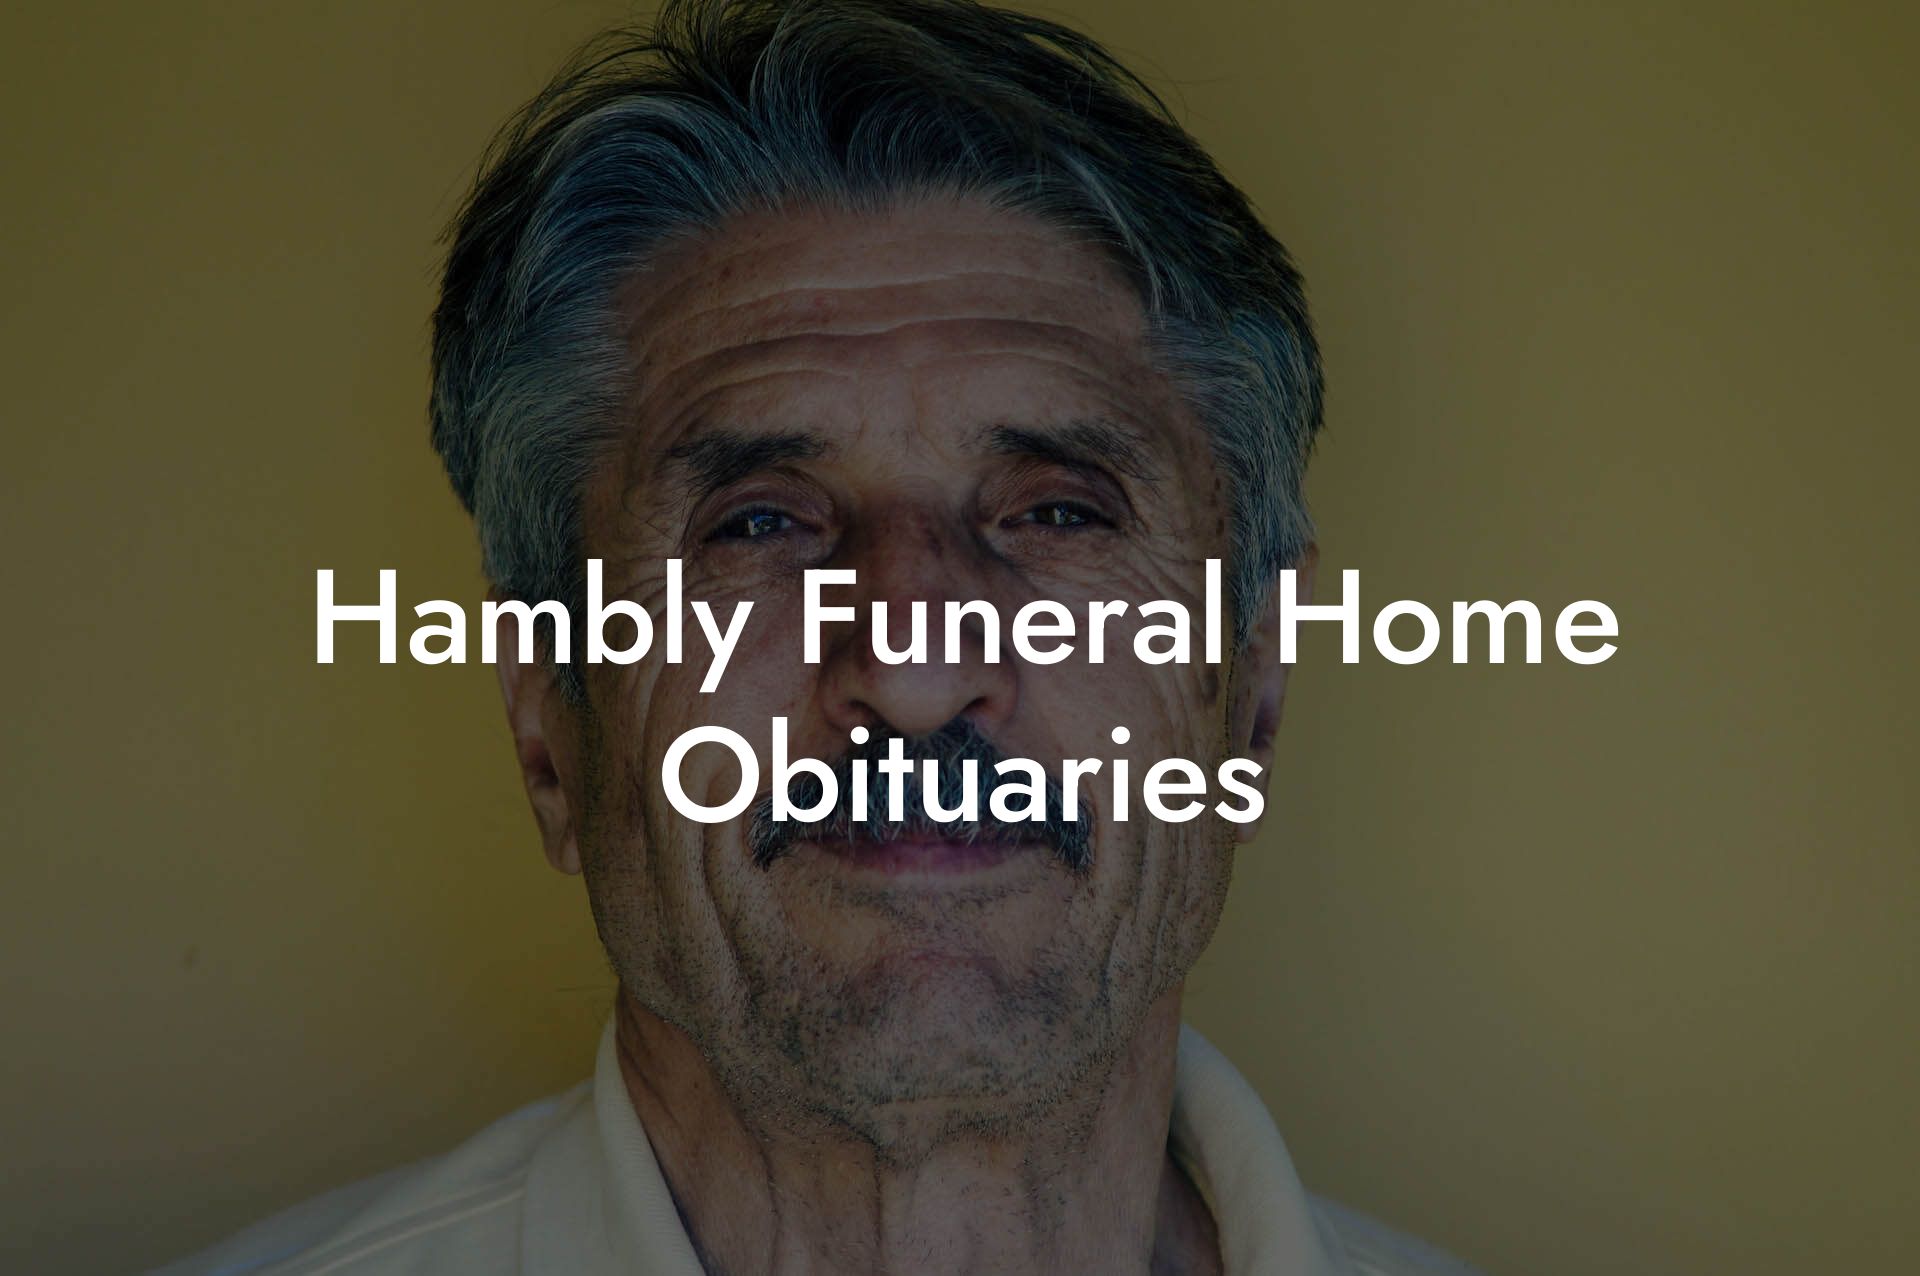 Hambly Funeral Home Obituaries